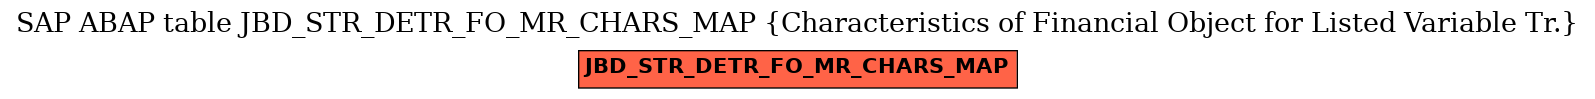 E-R Diagram for table JBD_STR_DETR_FO_MR_CHARS_MAP (Characteristics of Financial Object for Listed Variable Tr.)